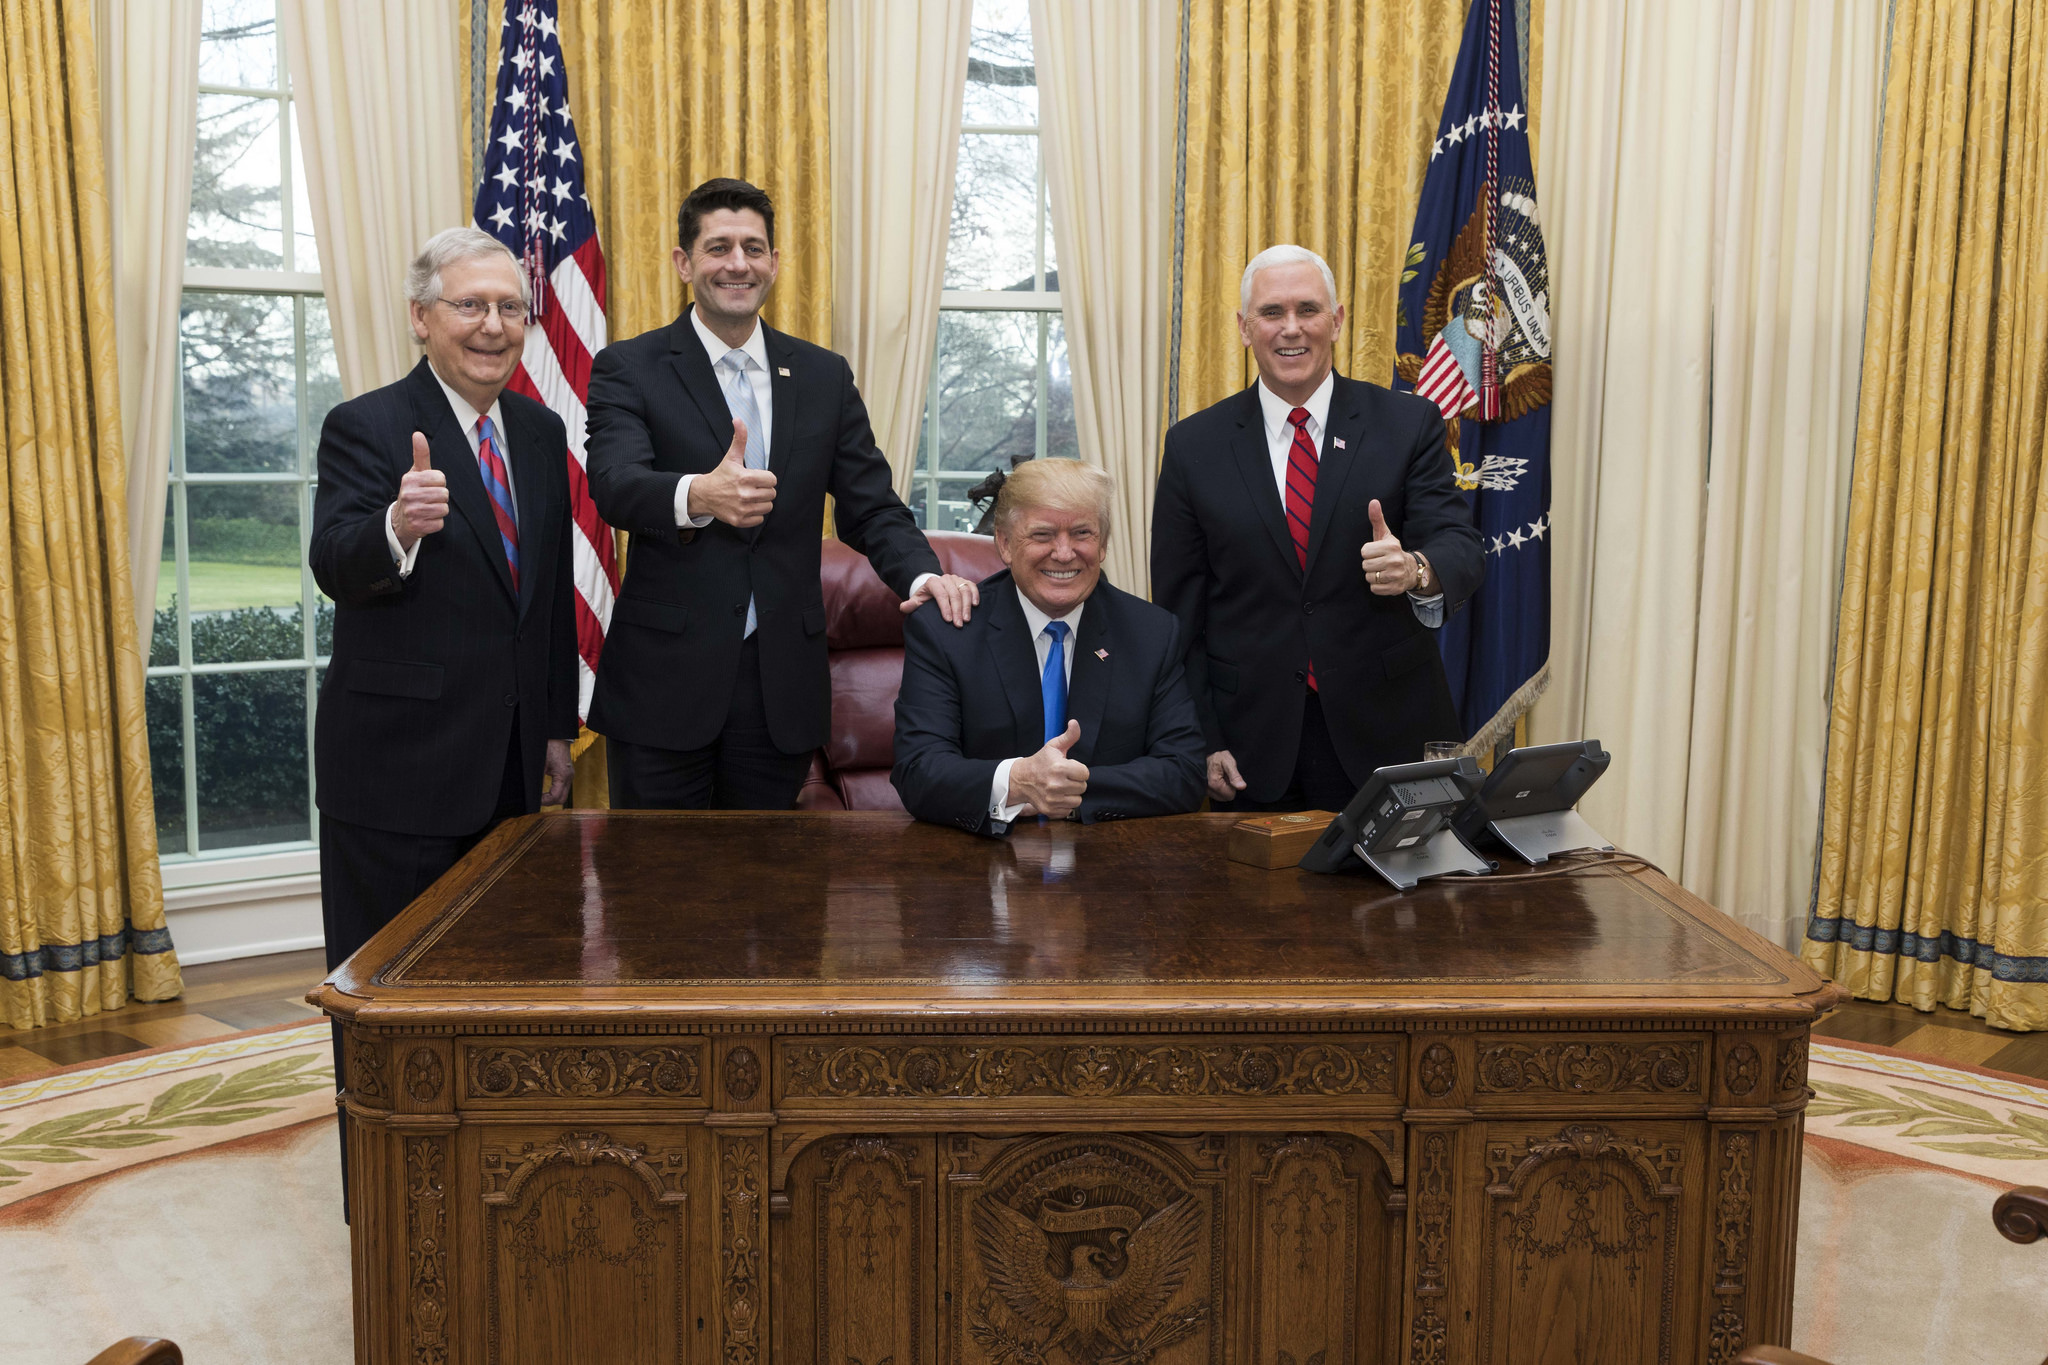 trump, mitch mcconnell, paul ryan, and mike pence, celebrating tax cuts